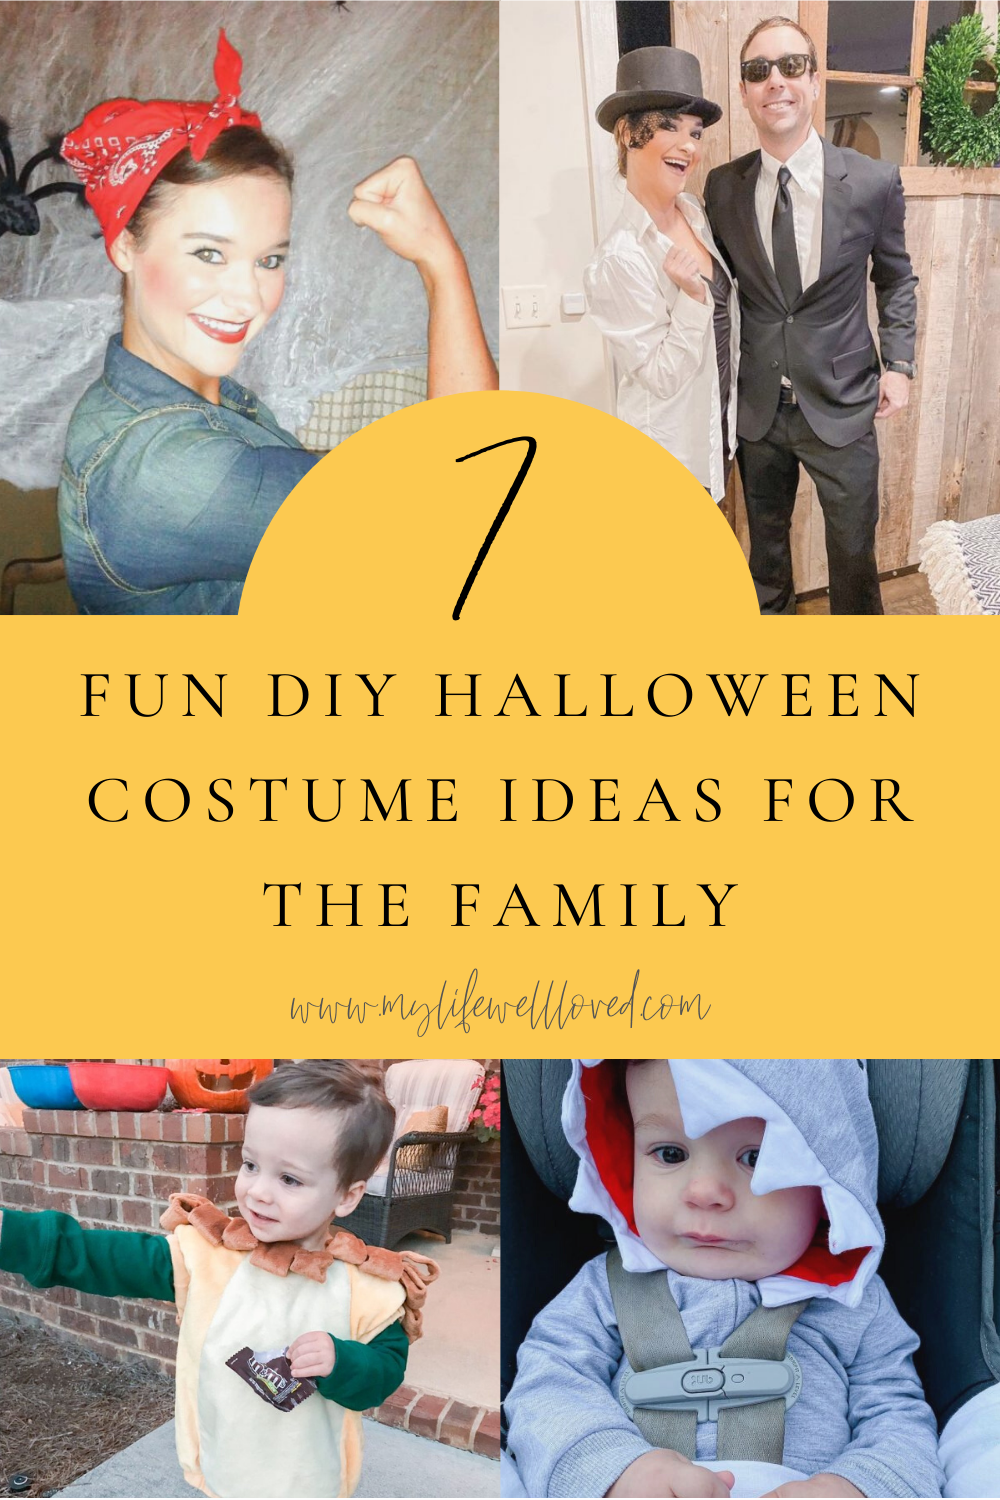 10+ DIY Halloween Costume Ideas For Kids and Adults image pic